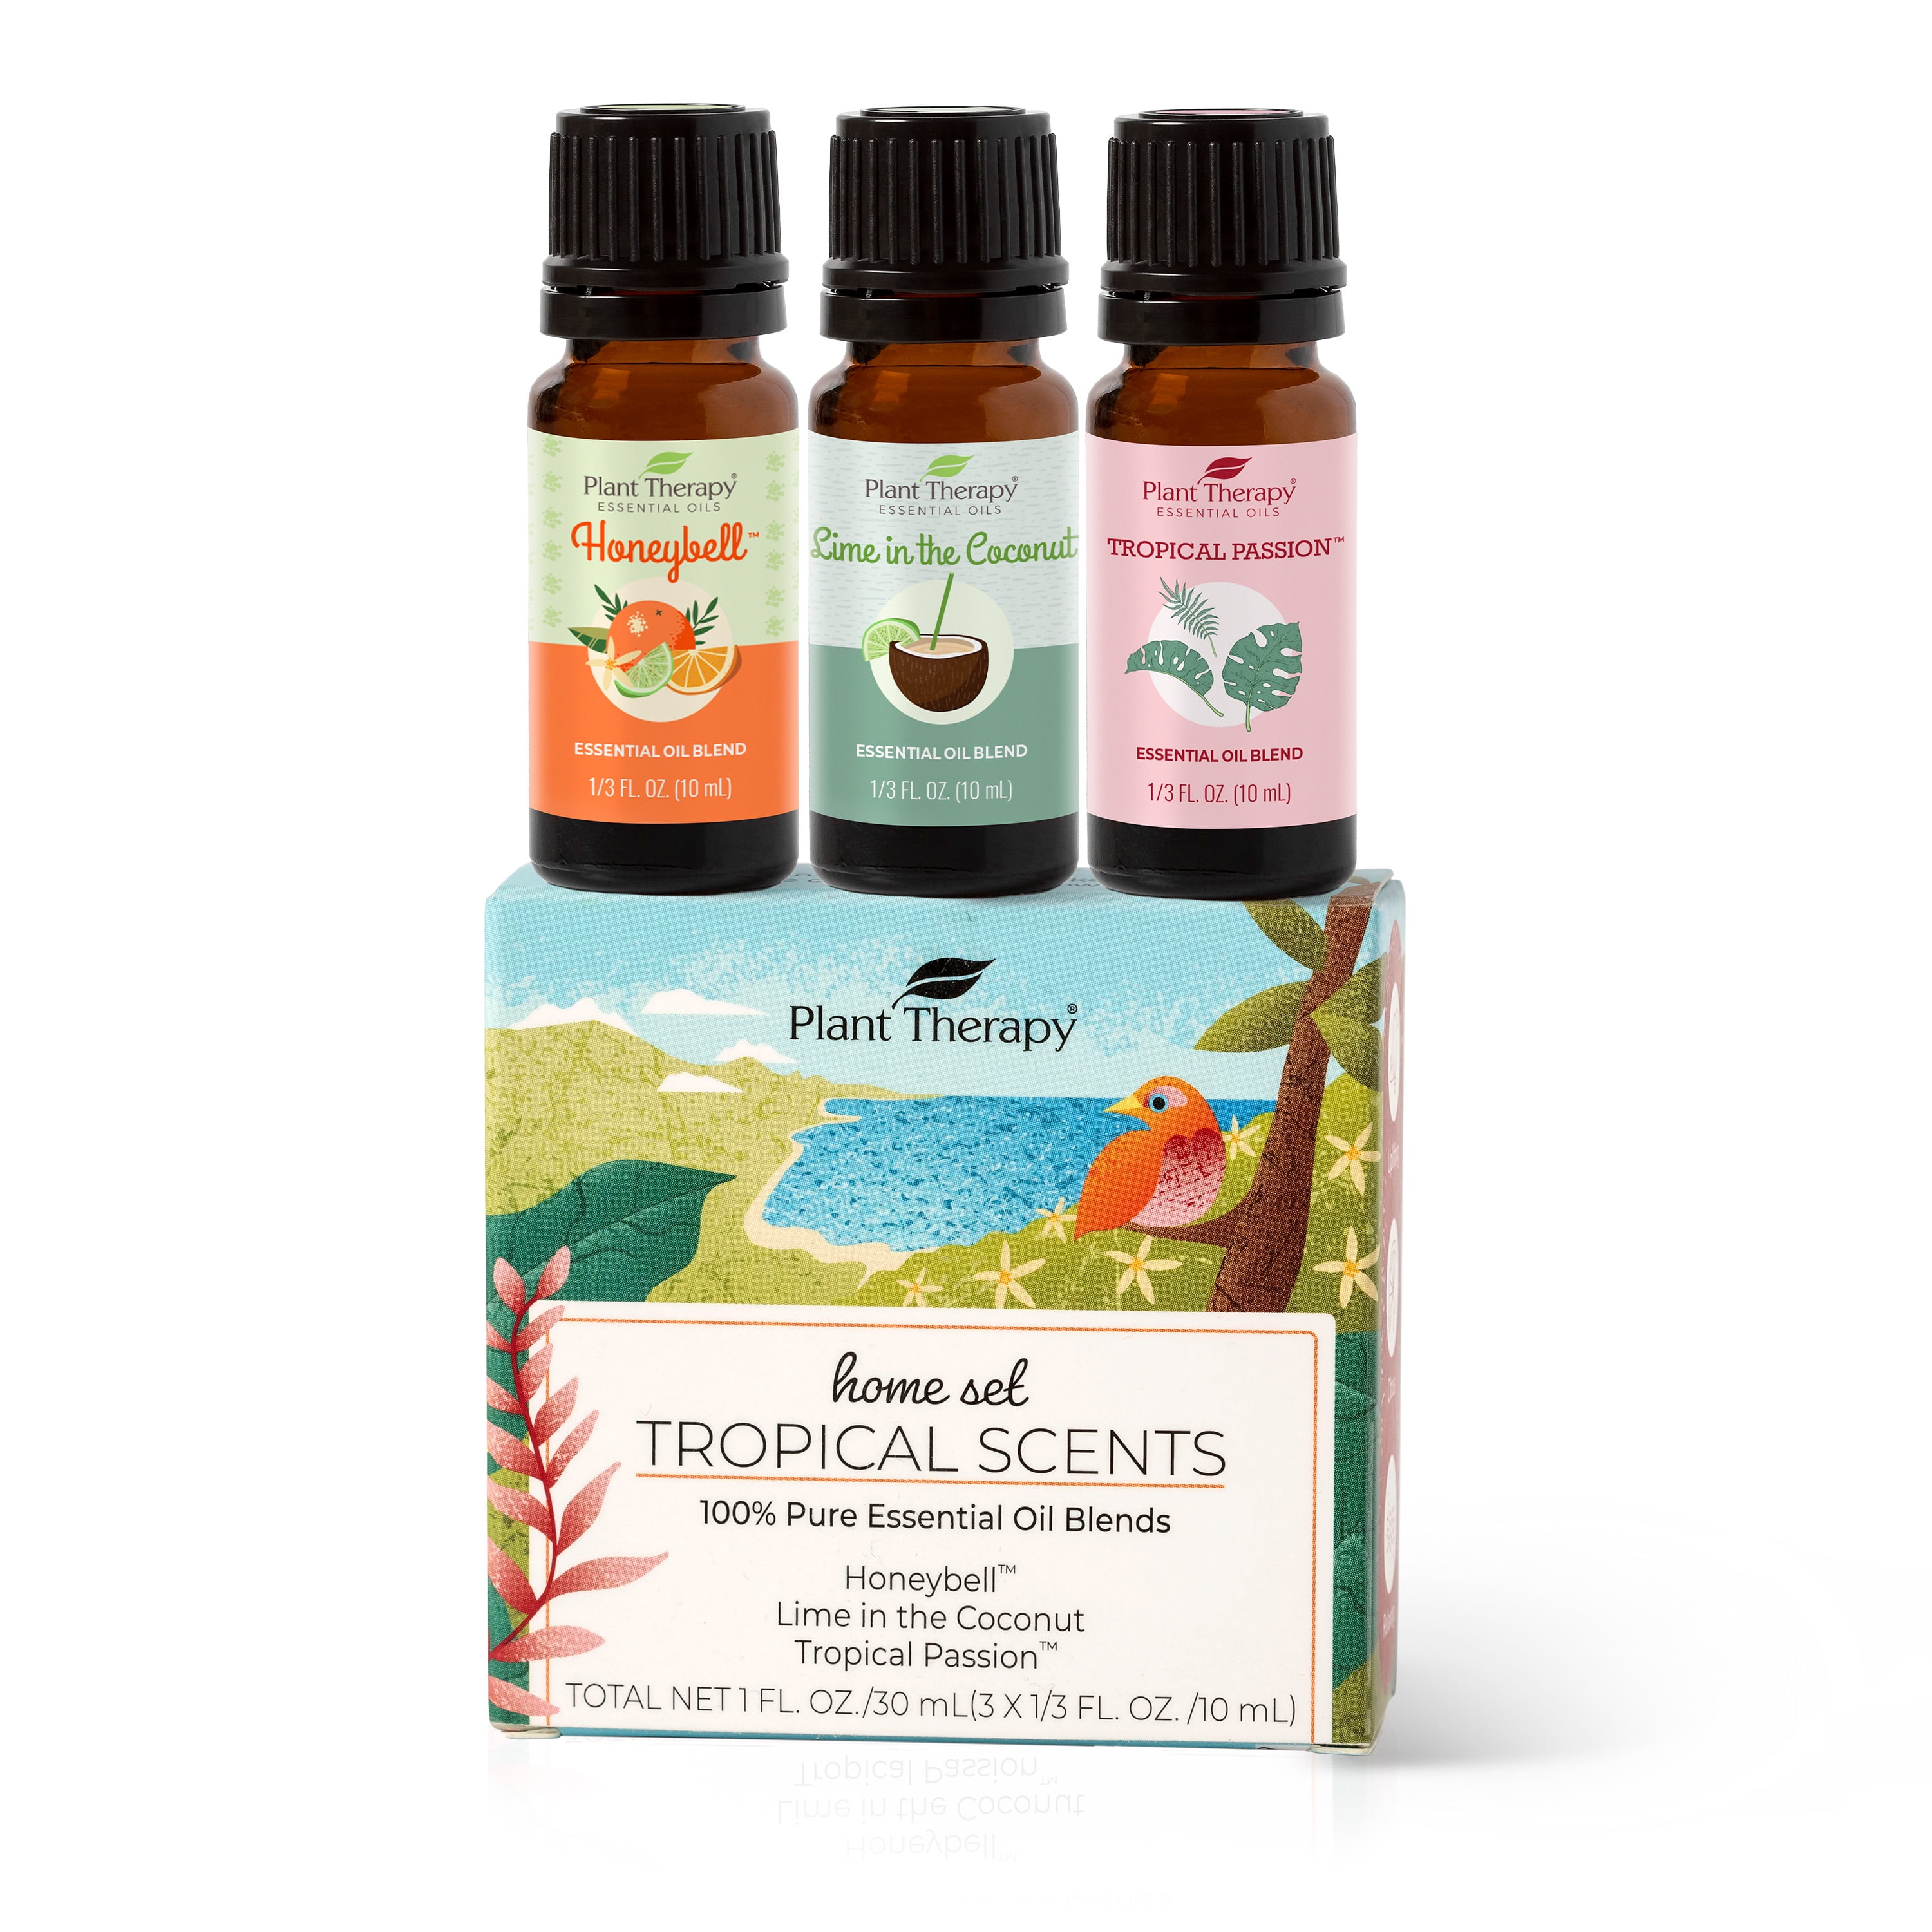 Plant Therapy Pain Support Essential Oil Blend Set 10 ml (1/3 oz) Each of Ache Away, Rapid Relief & Tension Relief, Pure, Undiluted, Essential Oil